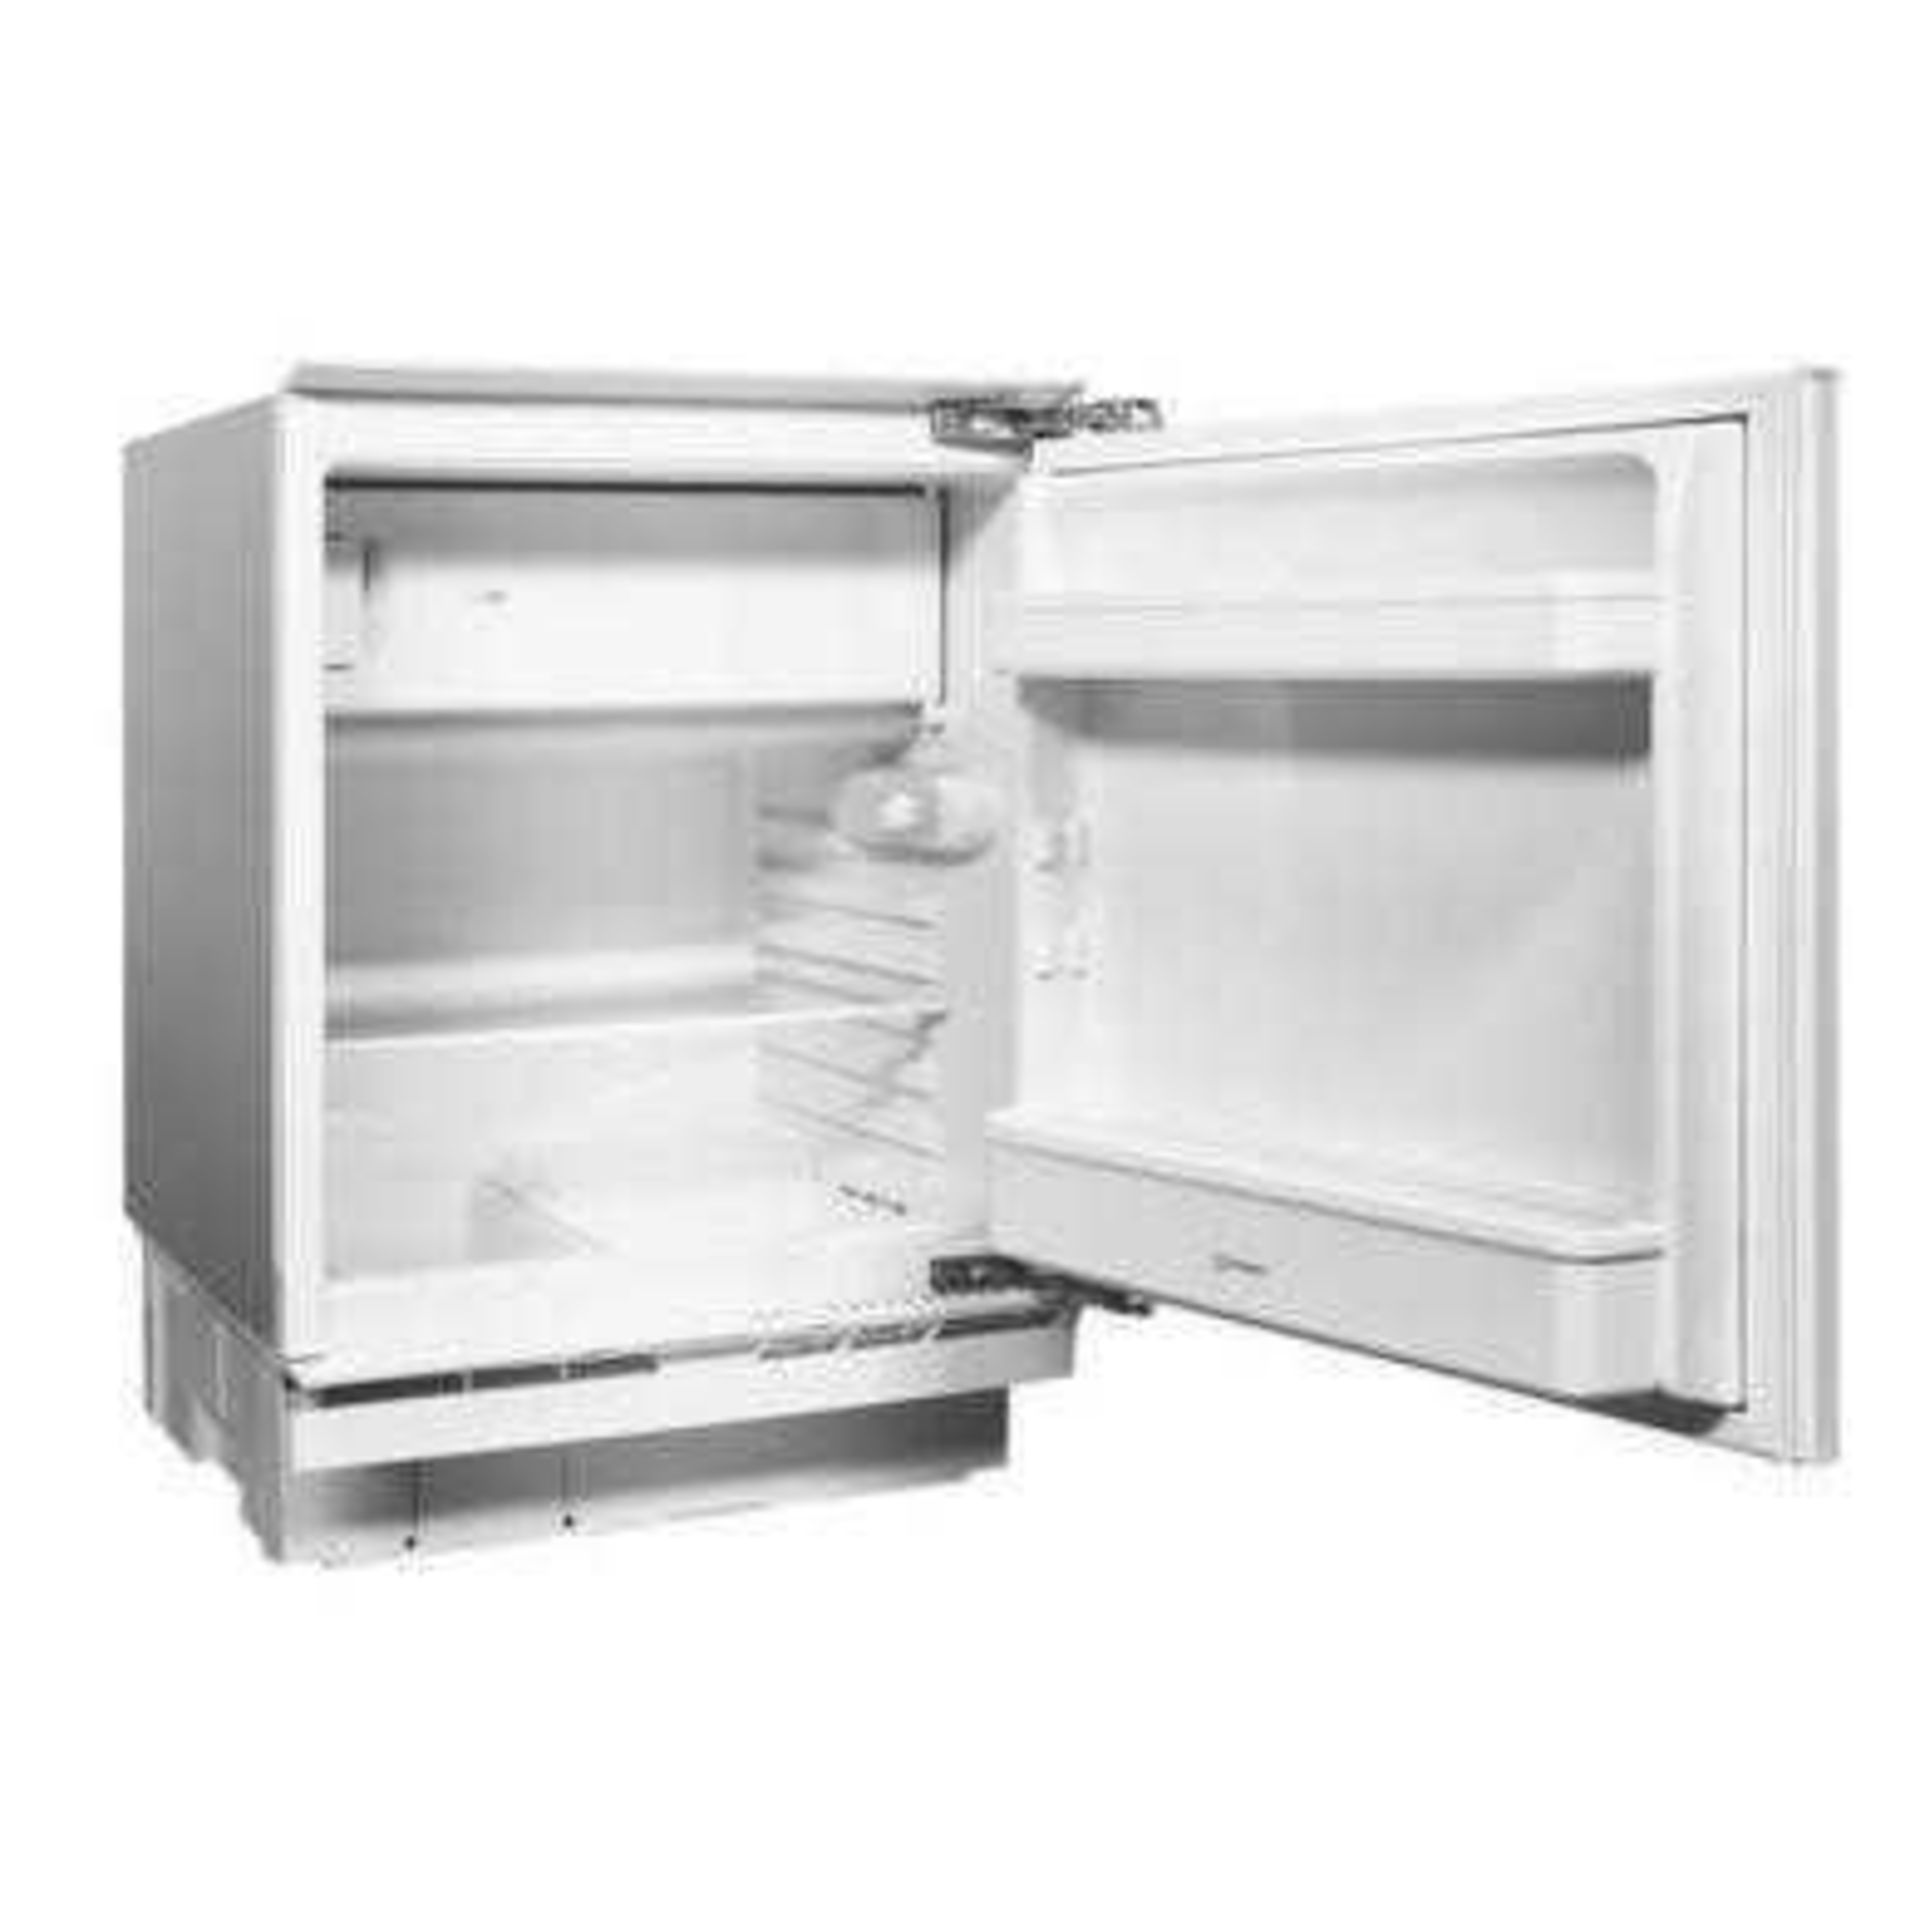 (Kw) RRP £200, Lot To Contain X1 Generic White Undercounter Fridge, Unboxed - Image 2 of 4